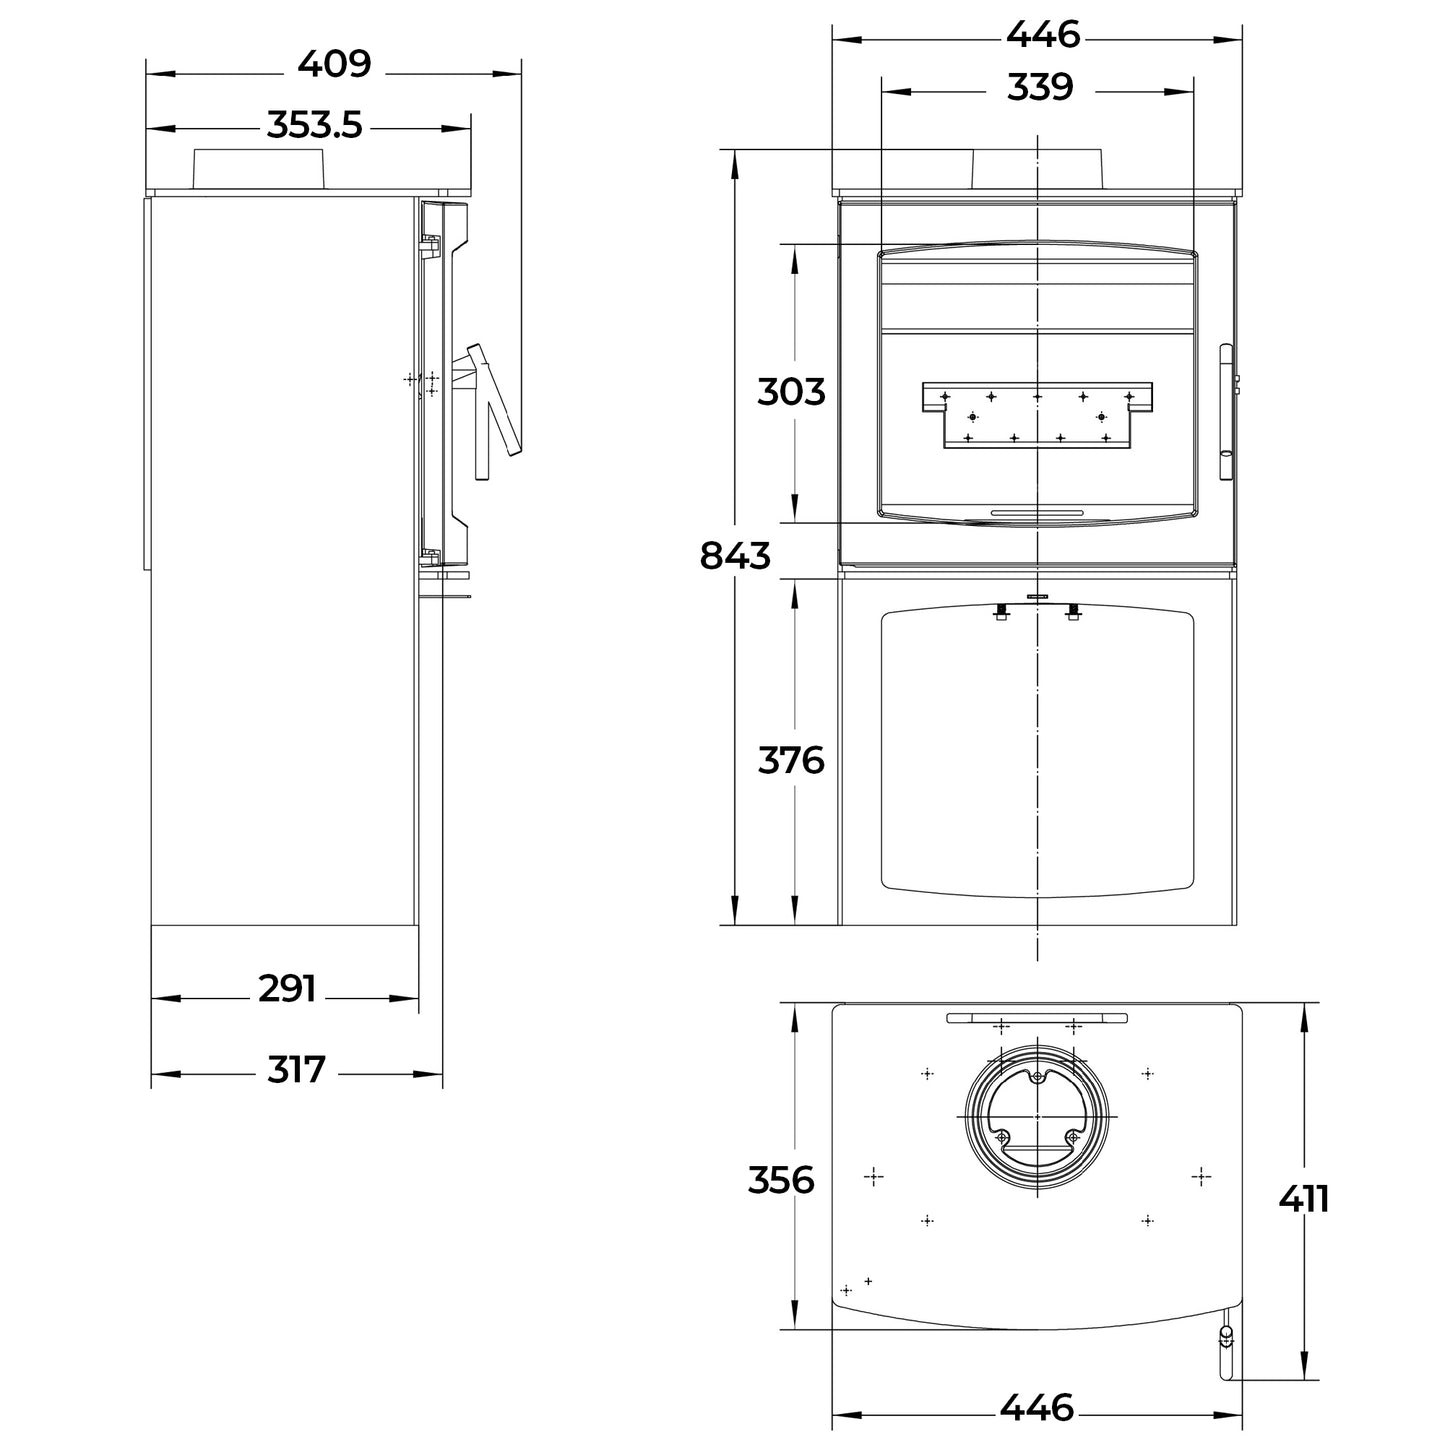 Dimensions and specifications for Small Tinderbox wood burning stove with log box